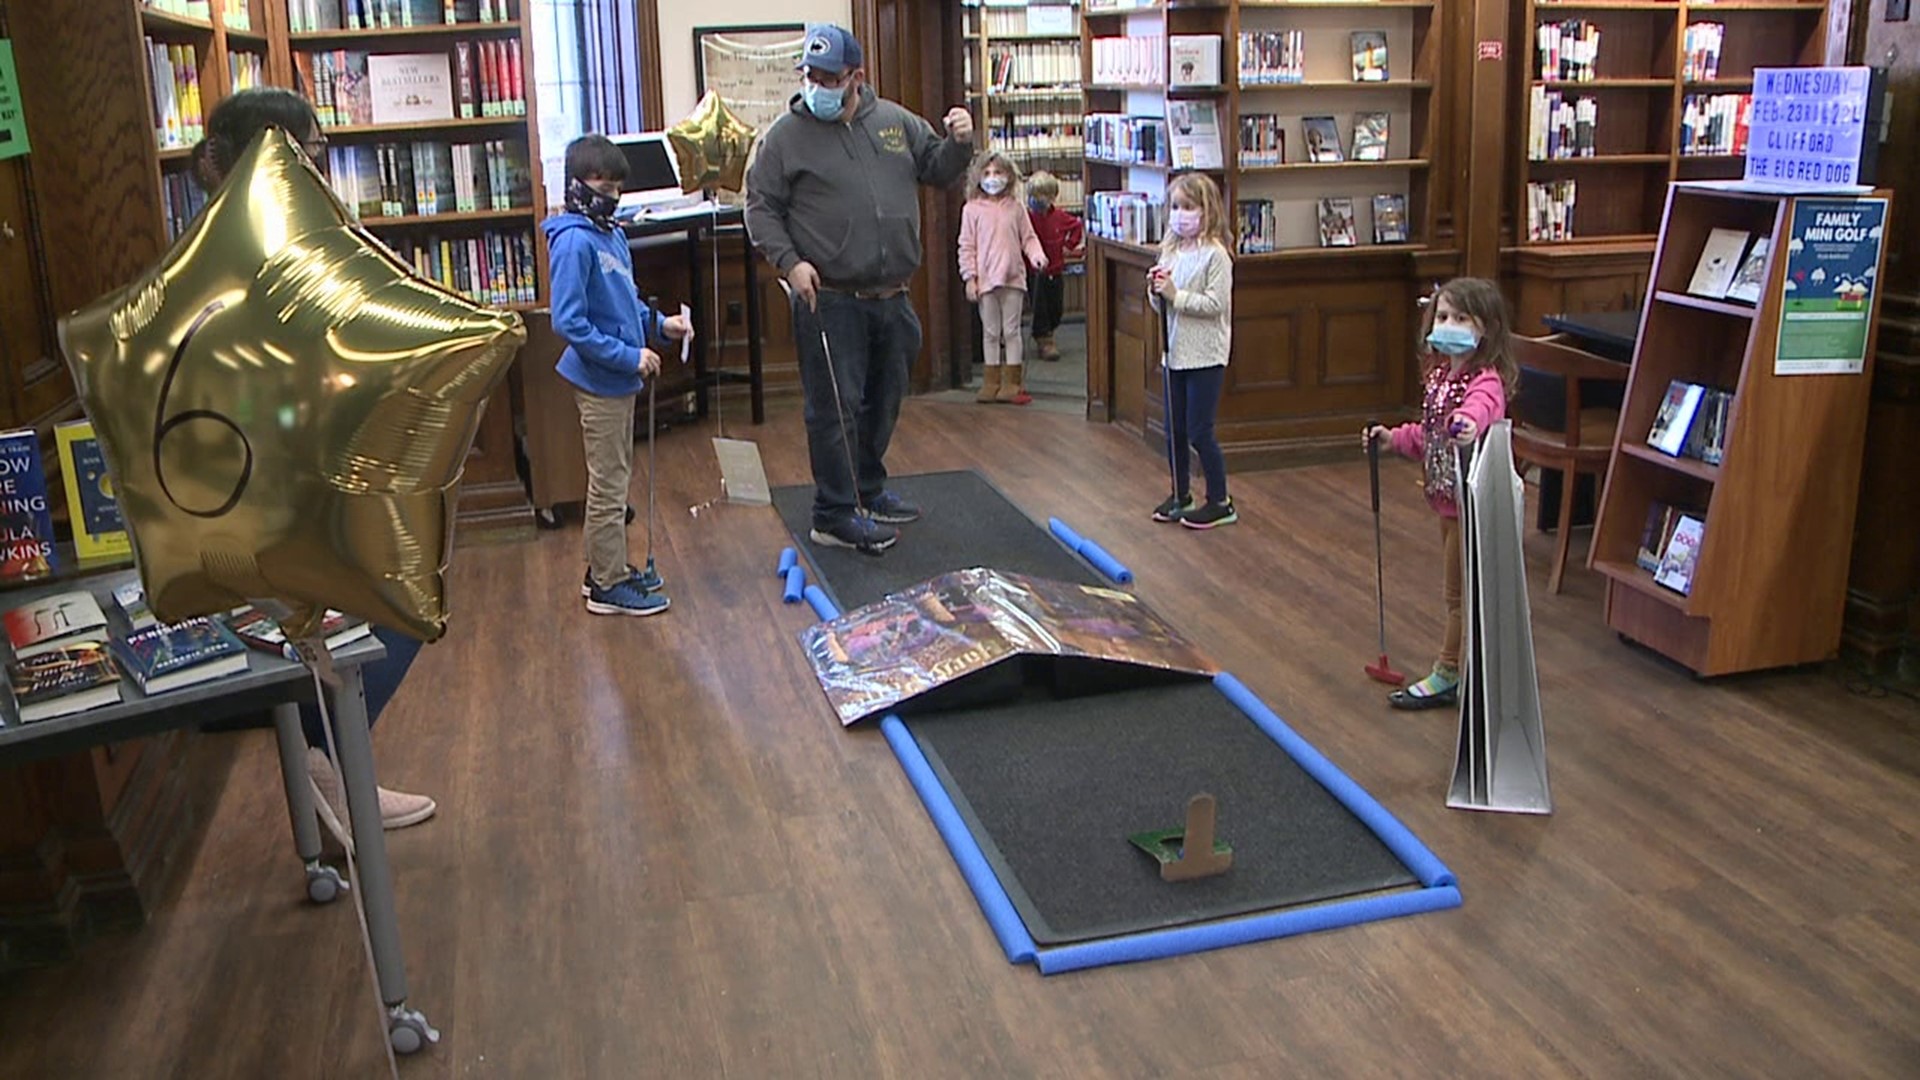 A library in Scranton hosted its annual mini-golf fundraiser on Sunday.